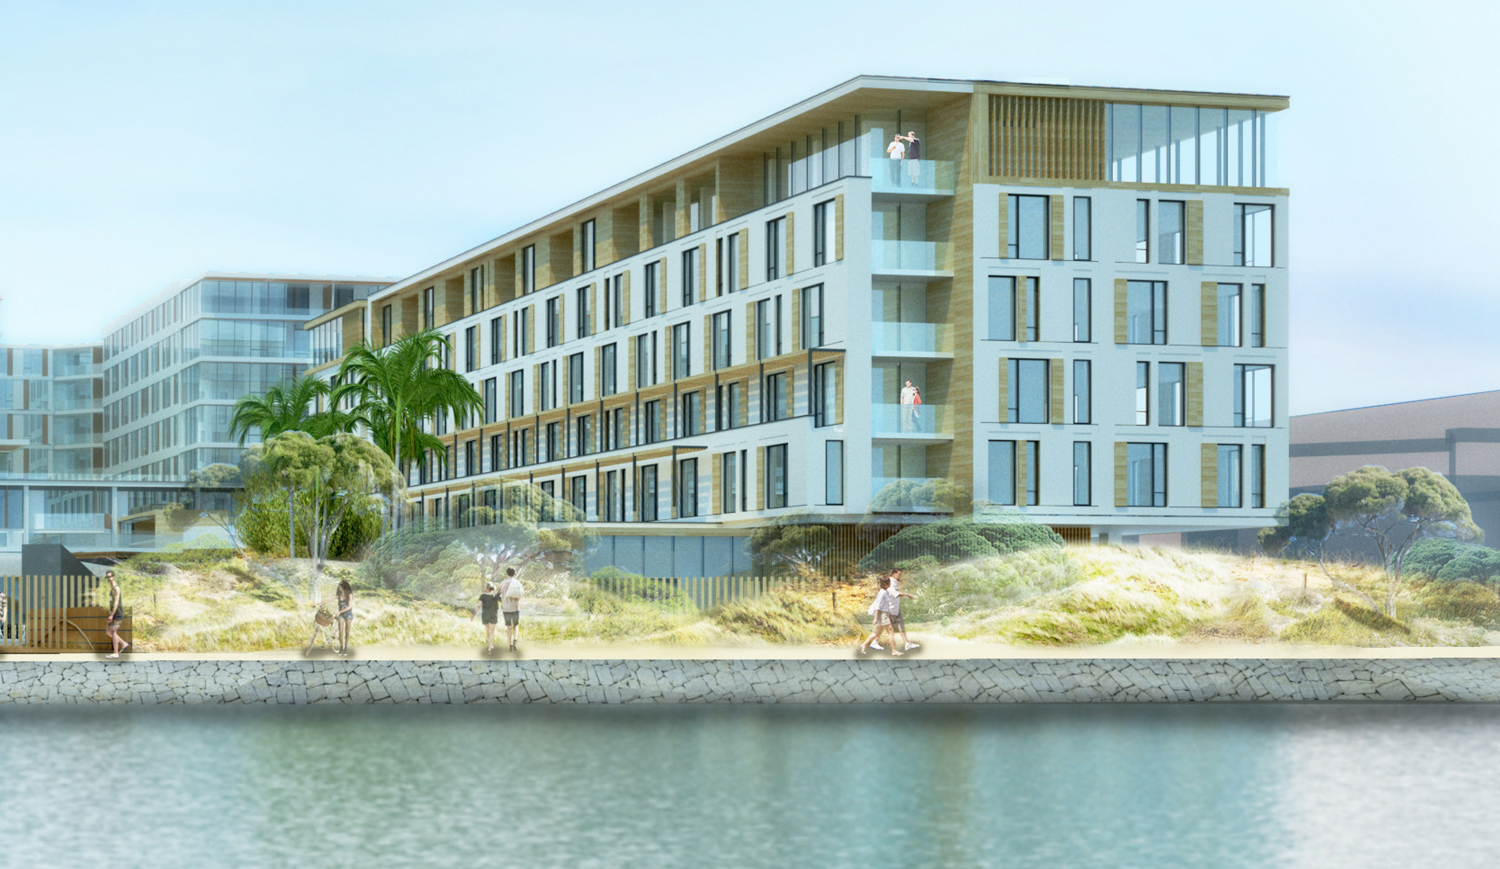 Jack London Square Parcel F3 hotel close-up, rendering by Solomon Cordwell Buenz